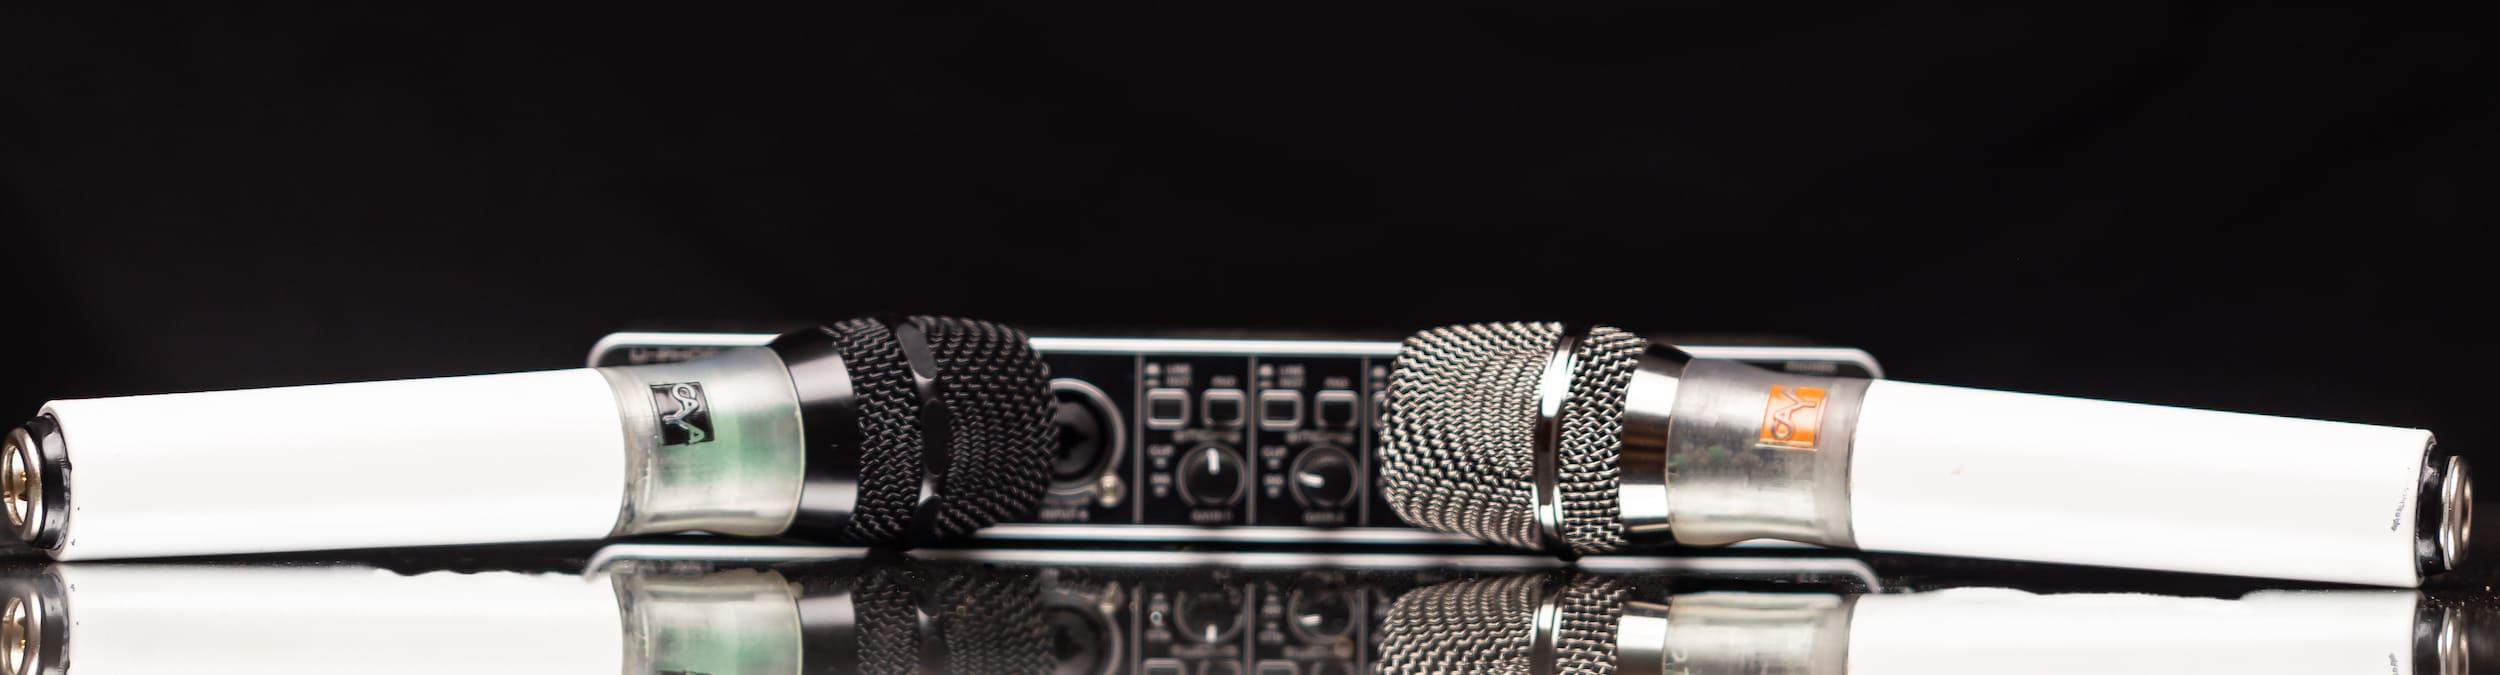 Top tips for choosing the right microphone for you